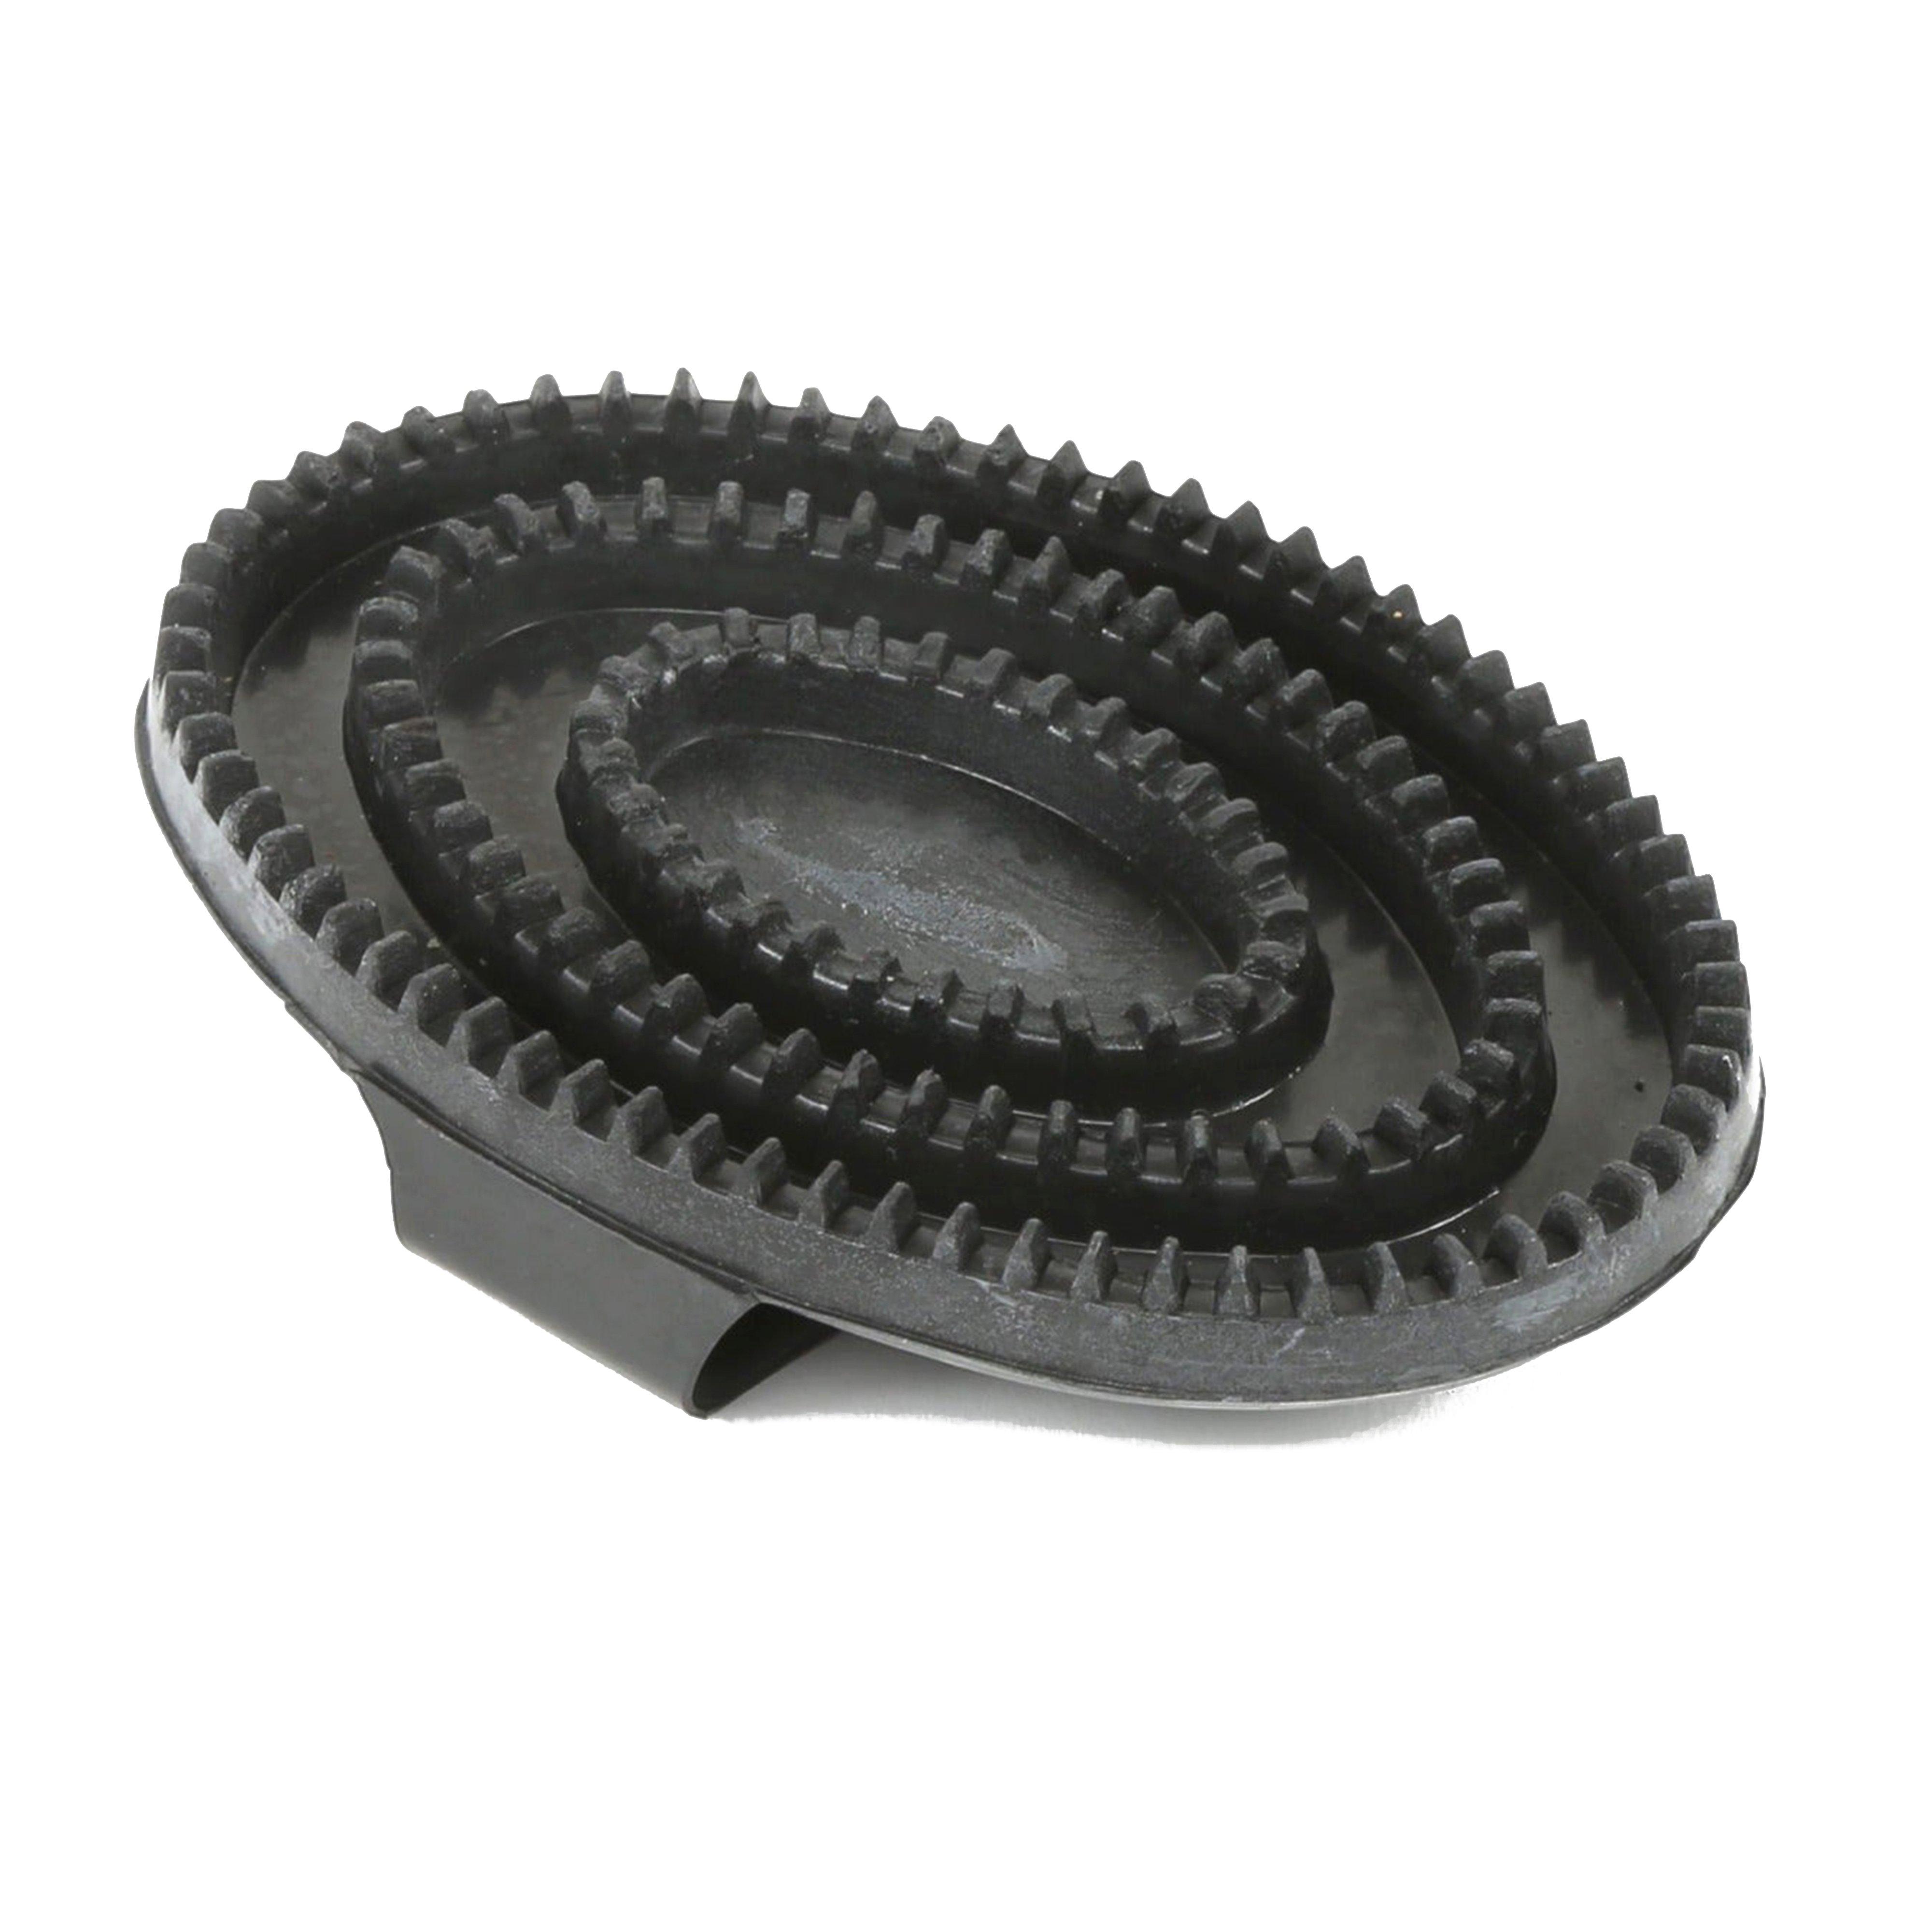 Rubber Curry Comb Black